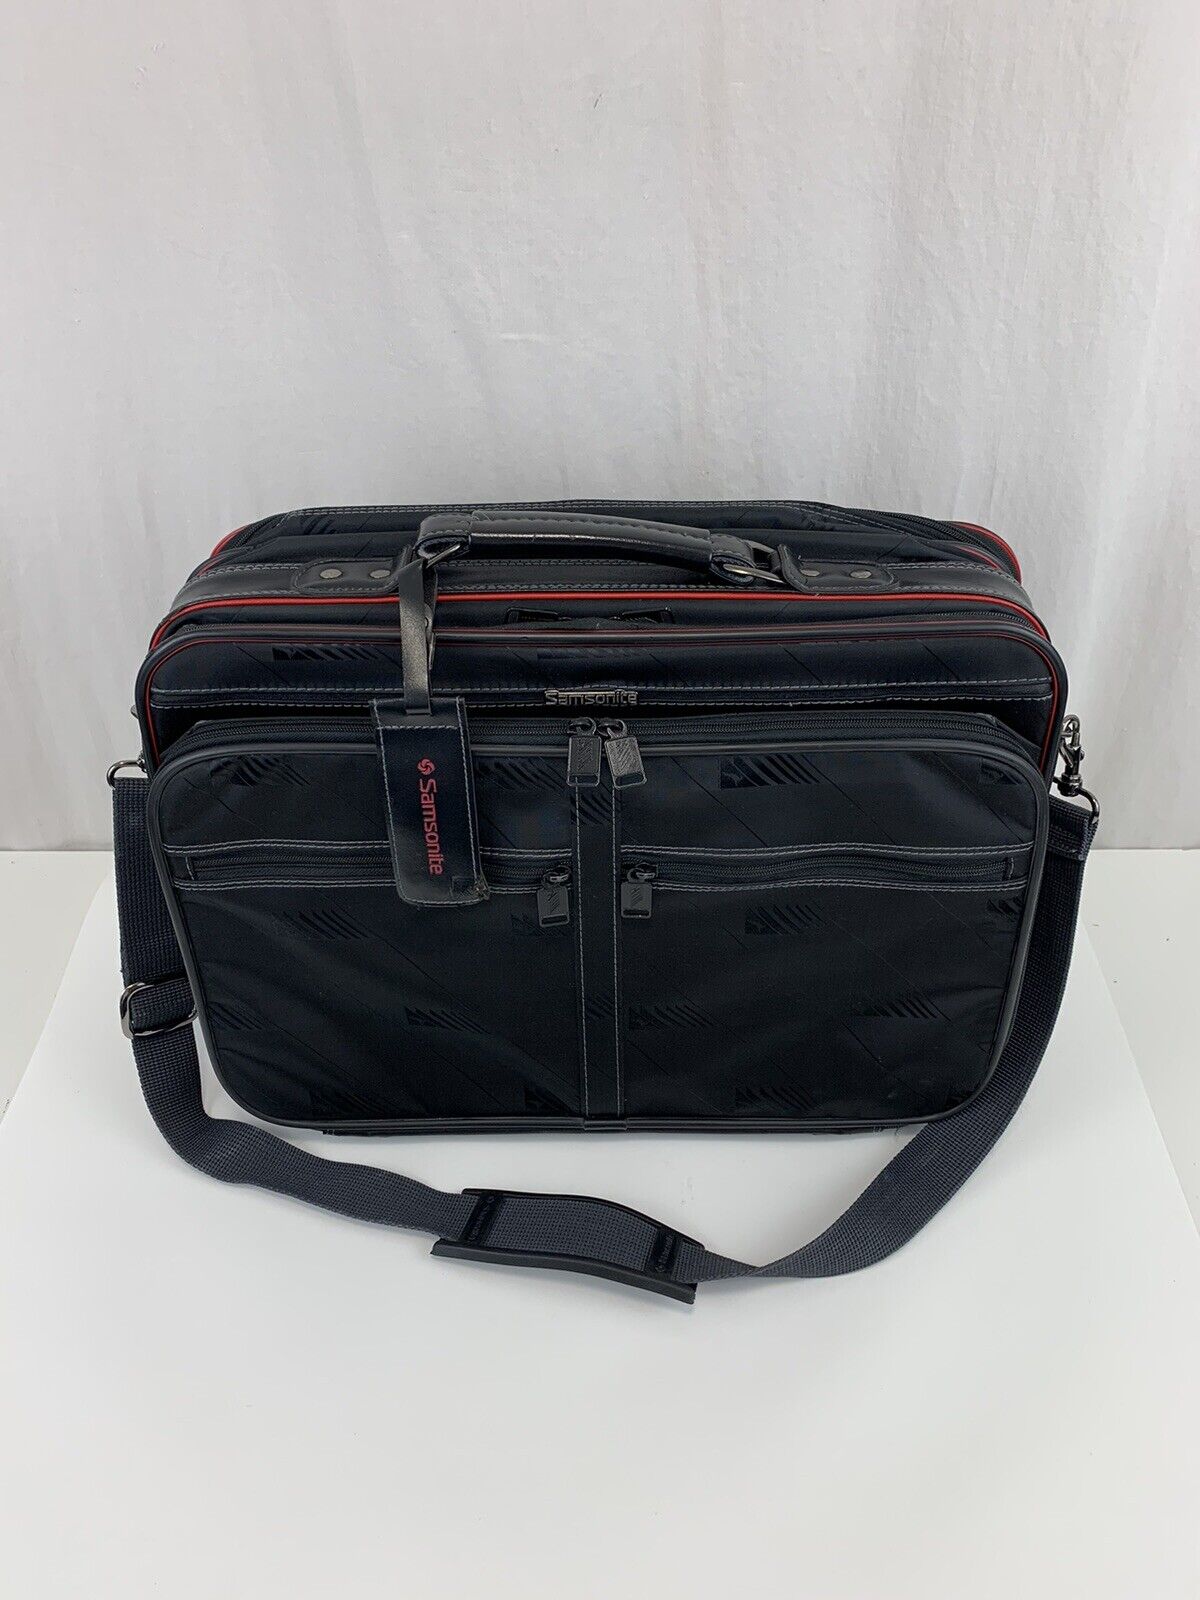 Collectible Samsonite Qantas Airline Bag Black With Strap Exclusive Luggage